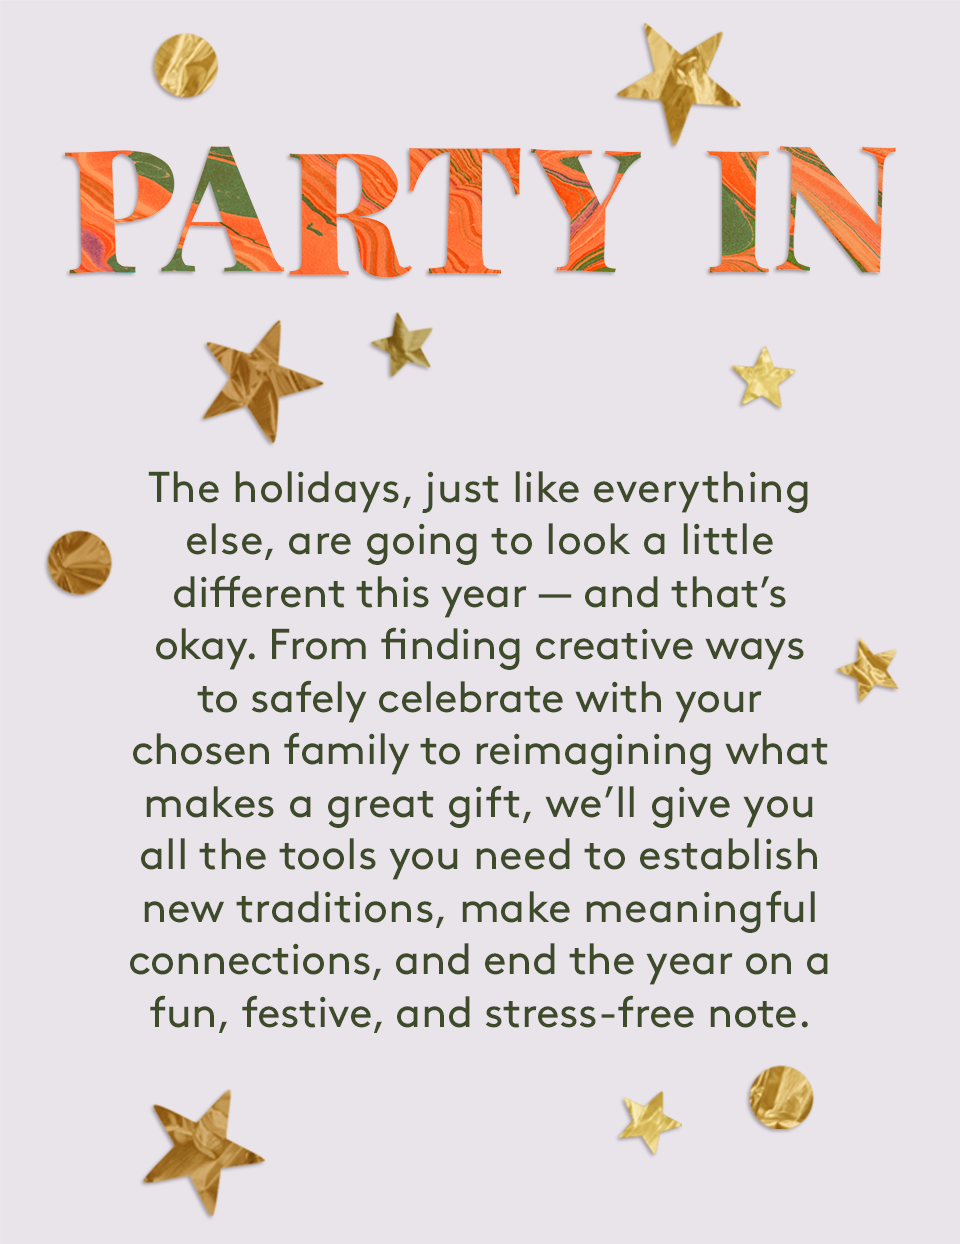 Party In:The holidays, just like everything else, are going to look a little different this year — and that’s okay. From finding creative ways to safely celebrate with your chosen family to reimagining what makes a great gift, we’ll give you all the tools you need to establish new traditions, make meaningful connections, and end the year on a fun, festive, and stress-free note. 